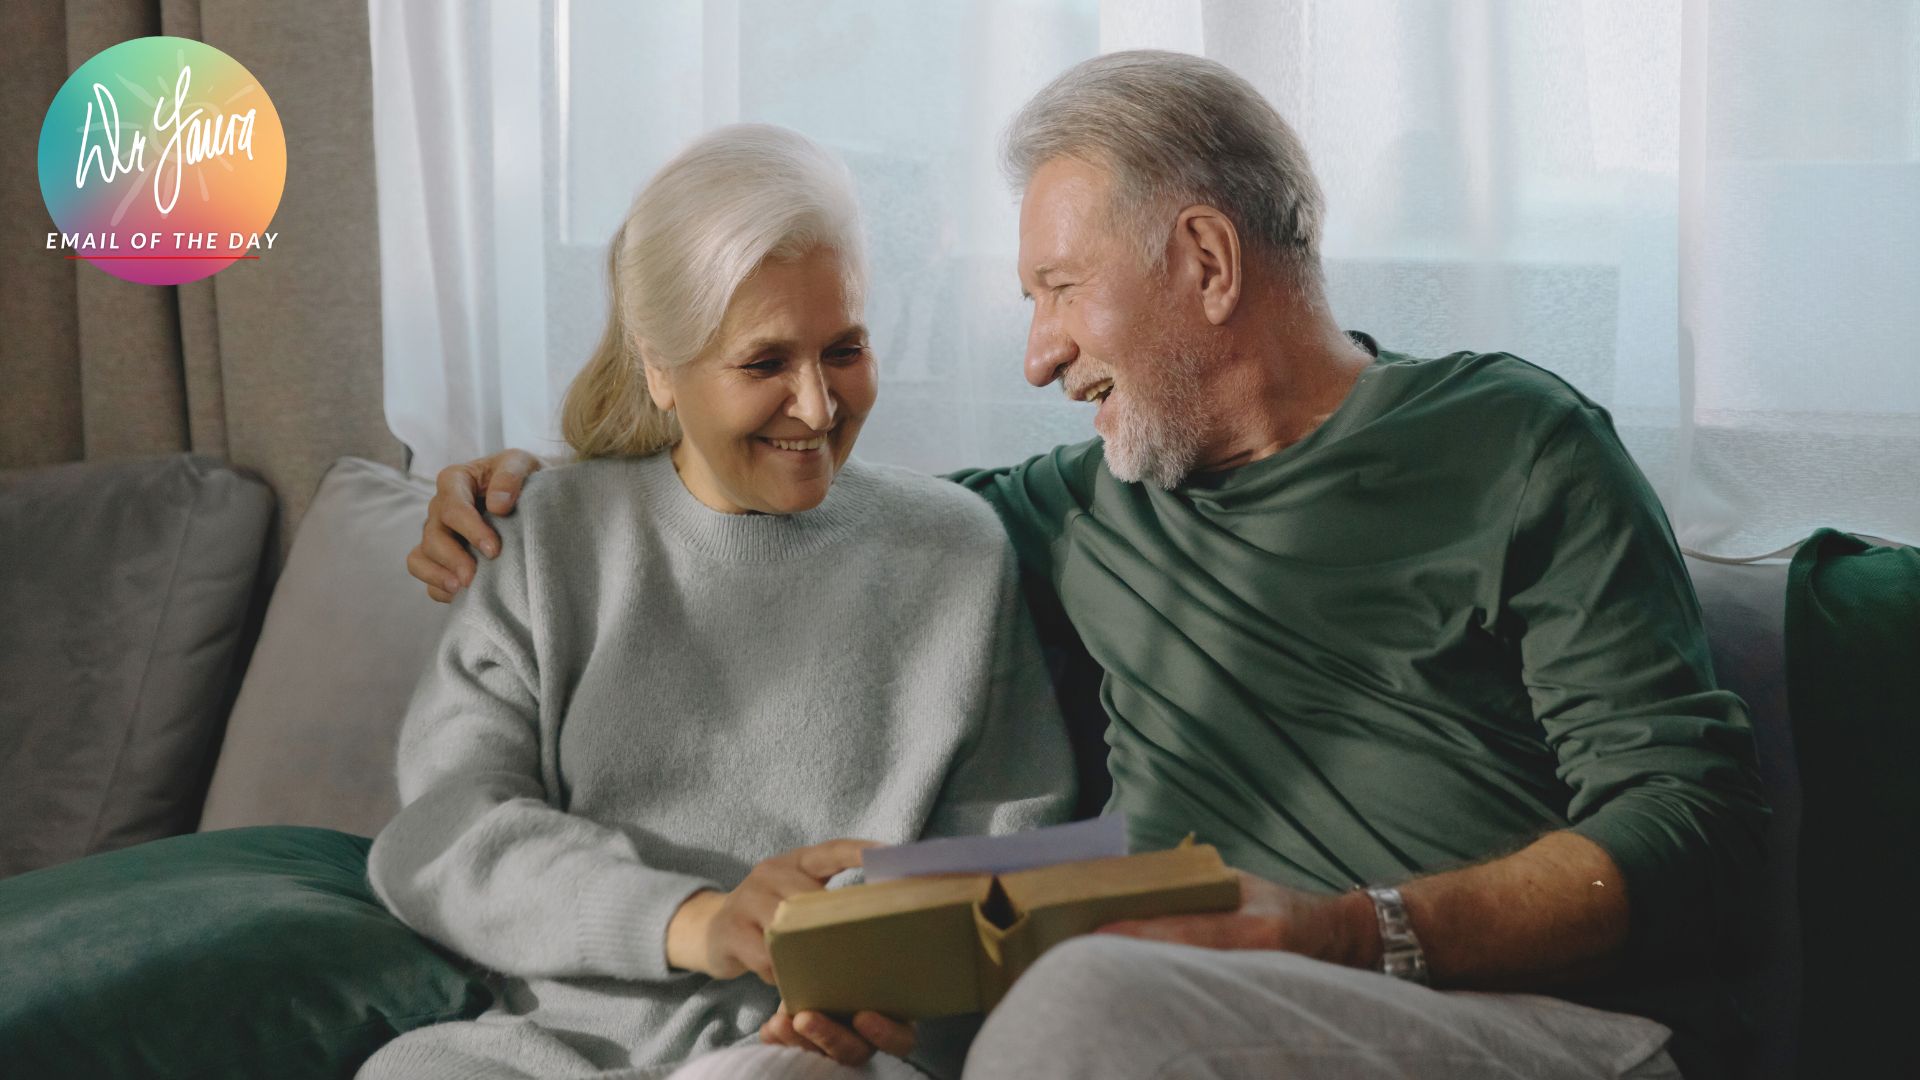 Older man and woman sit next to each other on the couch, both looking at a book together